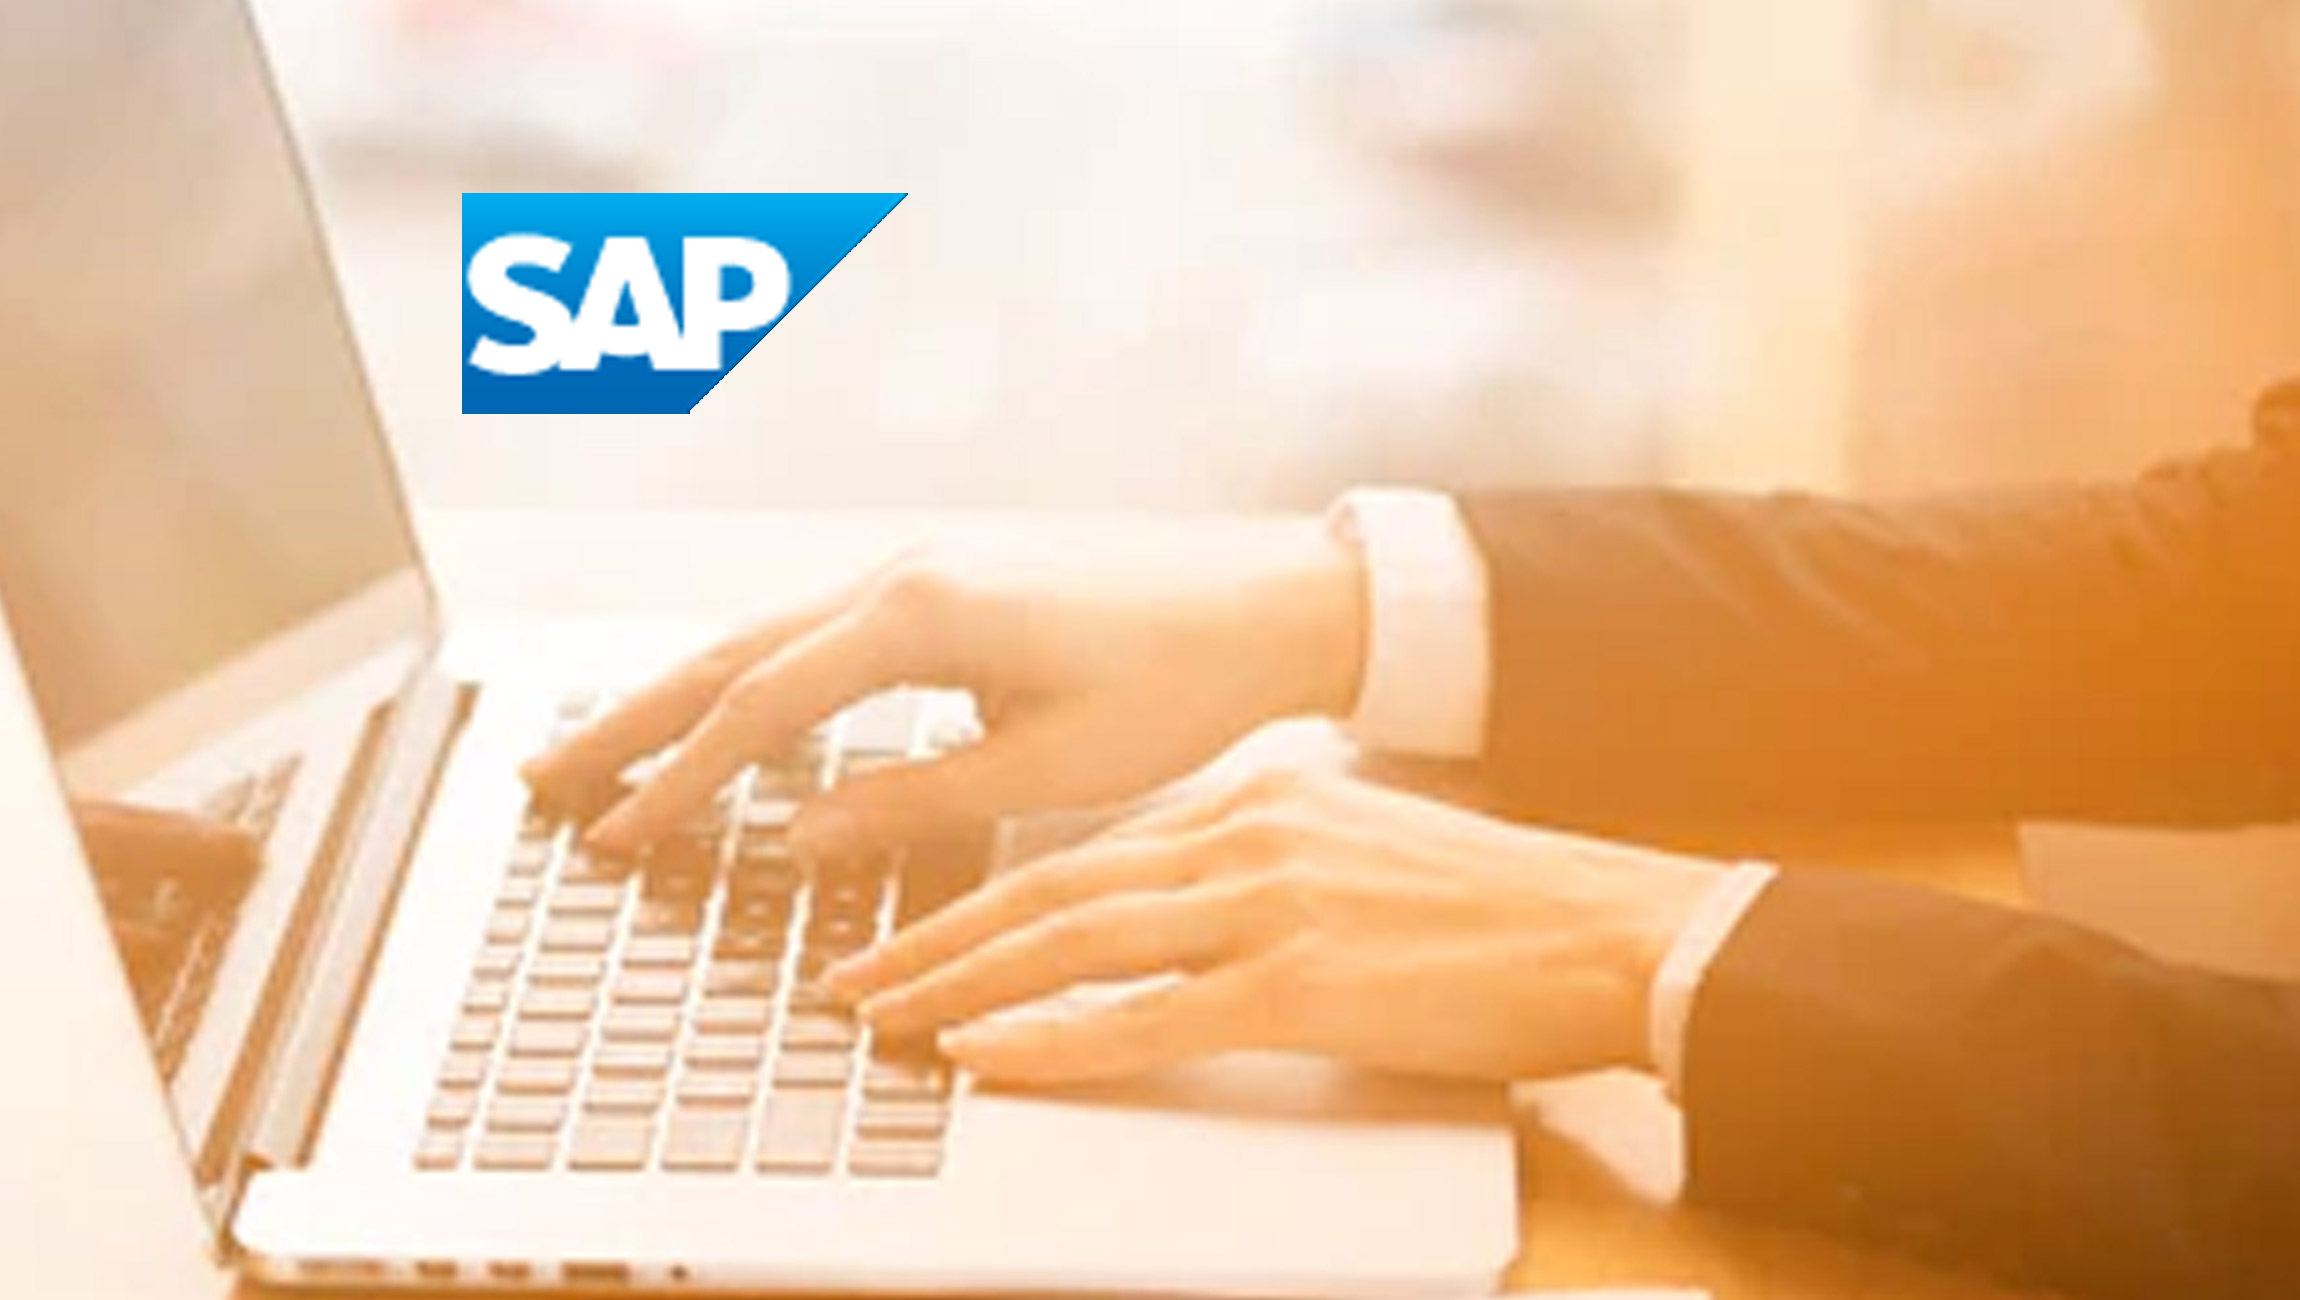 SAP Supervisory Board Extends Contracts with Executive Board Members Julia White and Scott Russell - Sabine Bendiek to End Her Contract December 31, 2023